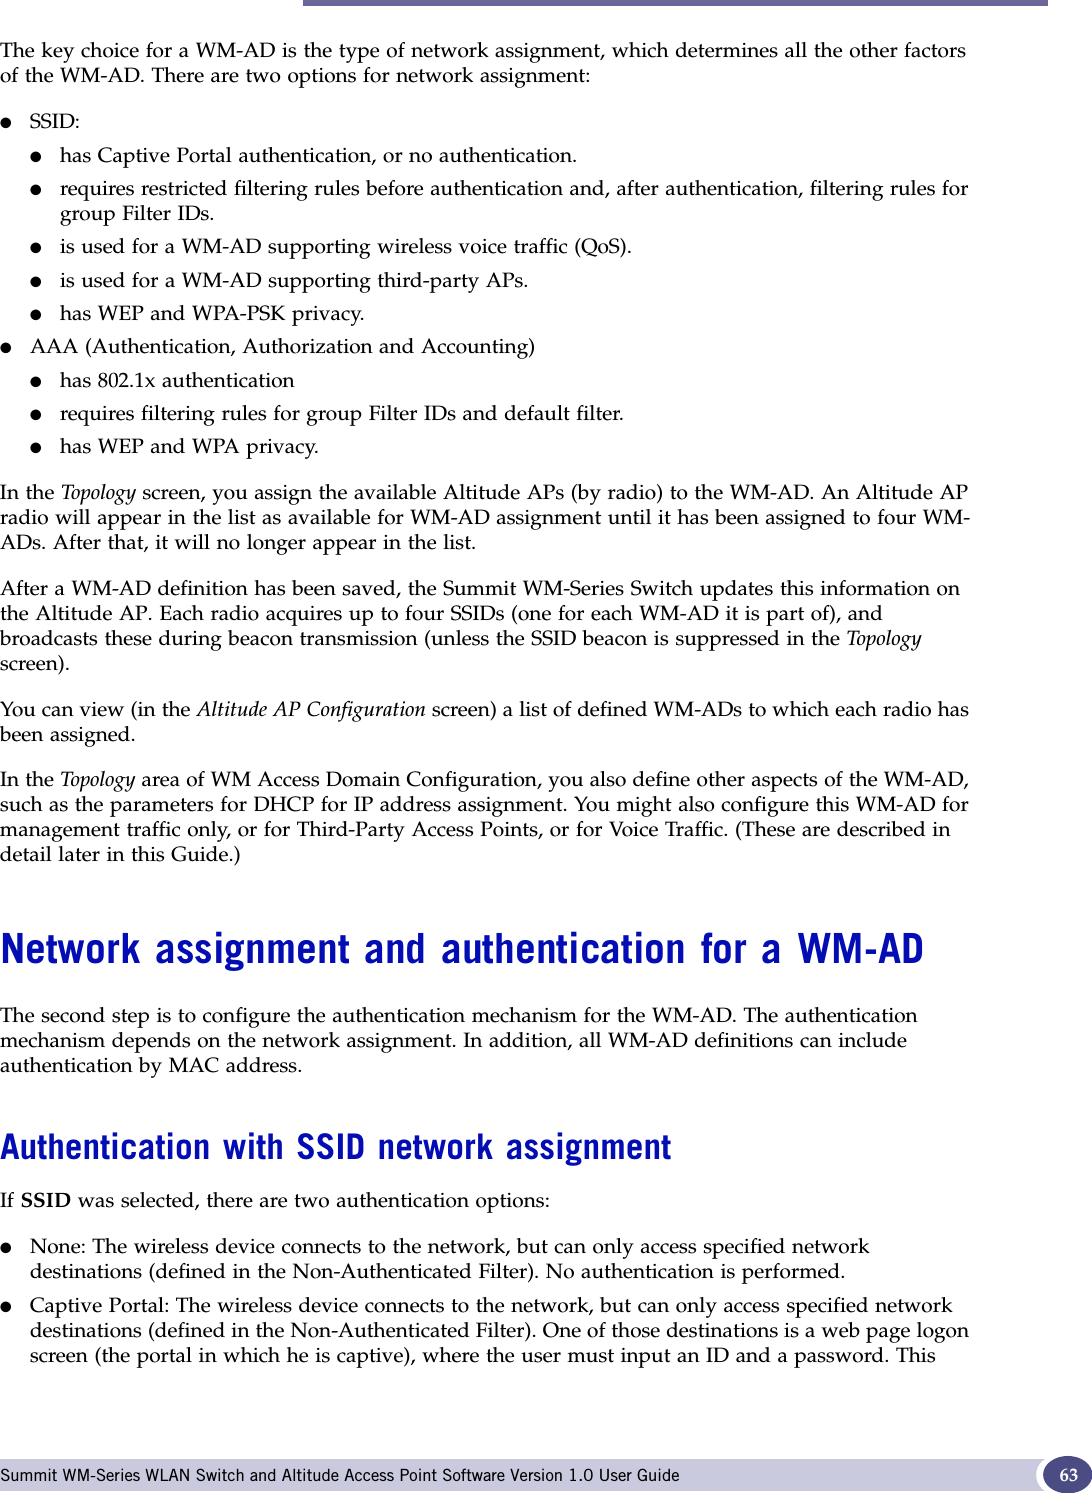 Network assignment and authentication for a WM-AD Summit WM-Series WLAN Switch and Altitude Access Point Software Version 1.0 User Guide 63The key choice for a WM-AD is the type of network assignment, which determines all the other factors of the WM-AD. There are two options for network assignment:●SSID:●has Captive Portal authentication, or no authentication.●requires restricted filtering rules before authentication and, after authentication, filtering rules for group Filter IDs. ●is used for a WM-AD supporting wireless voice traffic (QoS).●is used for a WM-AD supporting third-party APs.●has WEP and WPA-PSK privacy.●AAA (Authentication, Authorization and Accounting)●has 802.1x authentication●requires filtering rules for group Filter IDs and default filter.●has WEP and WPA privacy.In the Topology screen, you assign the available Altitude APs (by radio) to the WM-AD. An Altitude AP radio will appear in the list as available for WM-AD assignment until it has been assigned to four WM-ADs. After that, it will no longer appear in the list.After a WM-AD definition has been saved, the Summit WM-Series Switch updates this information on the Altitude AP. Each radio acquires up to four SSIDs (one for each WM-AD it is part of), and broadcasts these during beacon transmission (unless the SSID beacon is suppressed in the Topologyscreen).You can view (in the Altitude AP Configuration screen) a list of defined WM-ADs to which each radio has been assigned.In the Topo log y area of WM Access Domain Configuration, you also define other aspects of the WM-AD, such as the parameters for DHCP for IP address assignment. You might also configure this WM-AD for management traffic only, or for Third-Party Access Points, or for Voice Traffic. (These are described in detail later in this Guide.)Network assignment and authentication for a WM-ADThe second step is to configure the authentication mechanism for the WM-AD. The authentication mechanism depends on the network assignment. In addition, all WM-AD definitions can include authentication by MAC address.Authentication with SSID network assignmentIf SSID was selected, there are two authentication options:●None: The wireless device connects to the network, but can only access specified network destinations (defined in the Non-Authenticated Filter). No authentication is performed.●Captive Portal: The wireless device connects to the network, but can only access specified network destinations (defined in the Non-Authenticated Filter). One of those destinations is a web page logon screen (the portal in which he is captive), where the user must input an ID and a password. This 